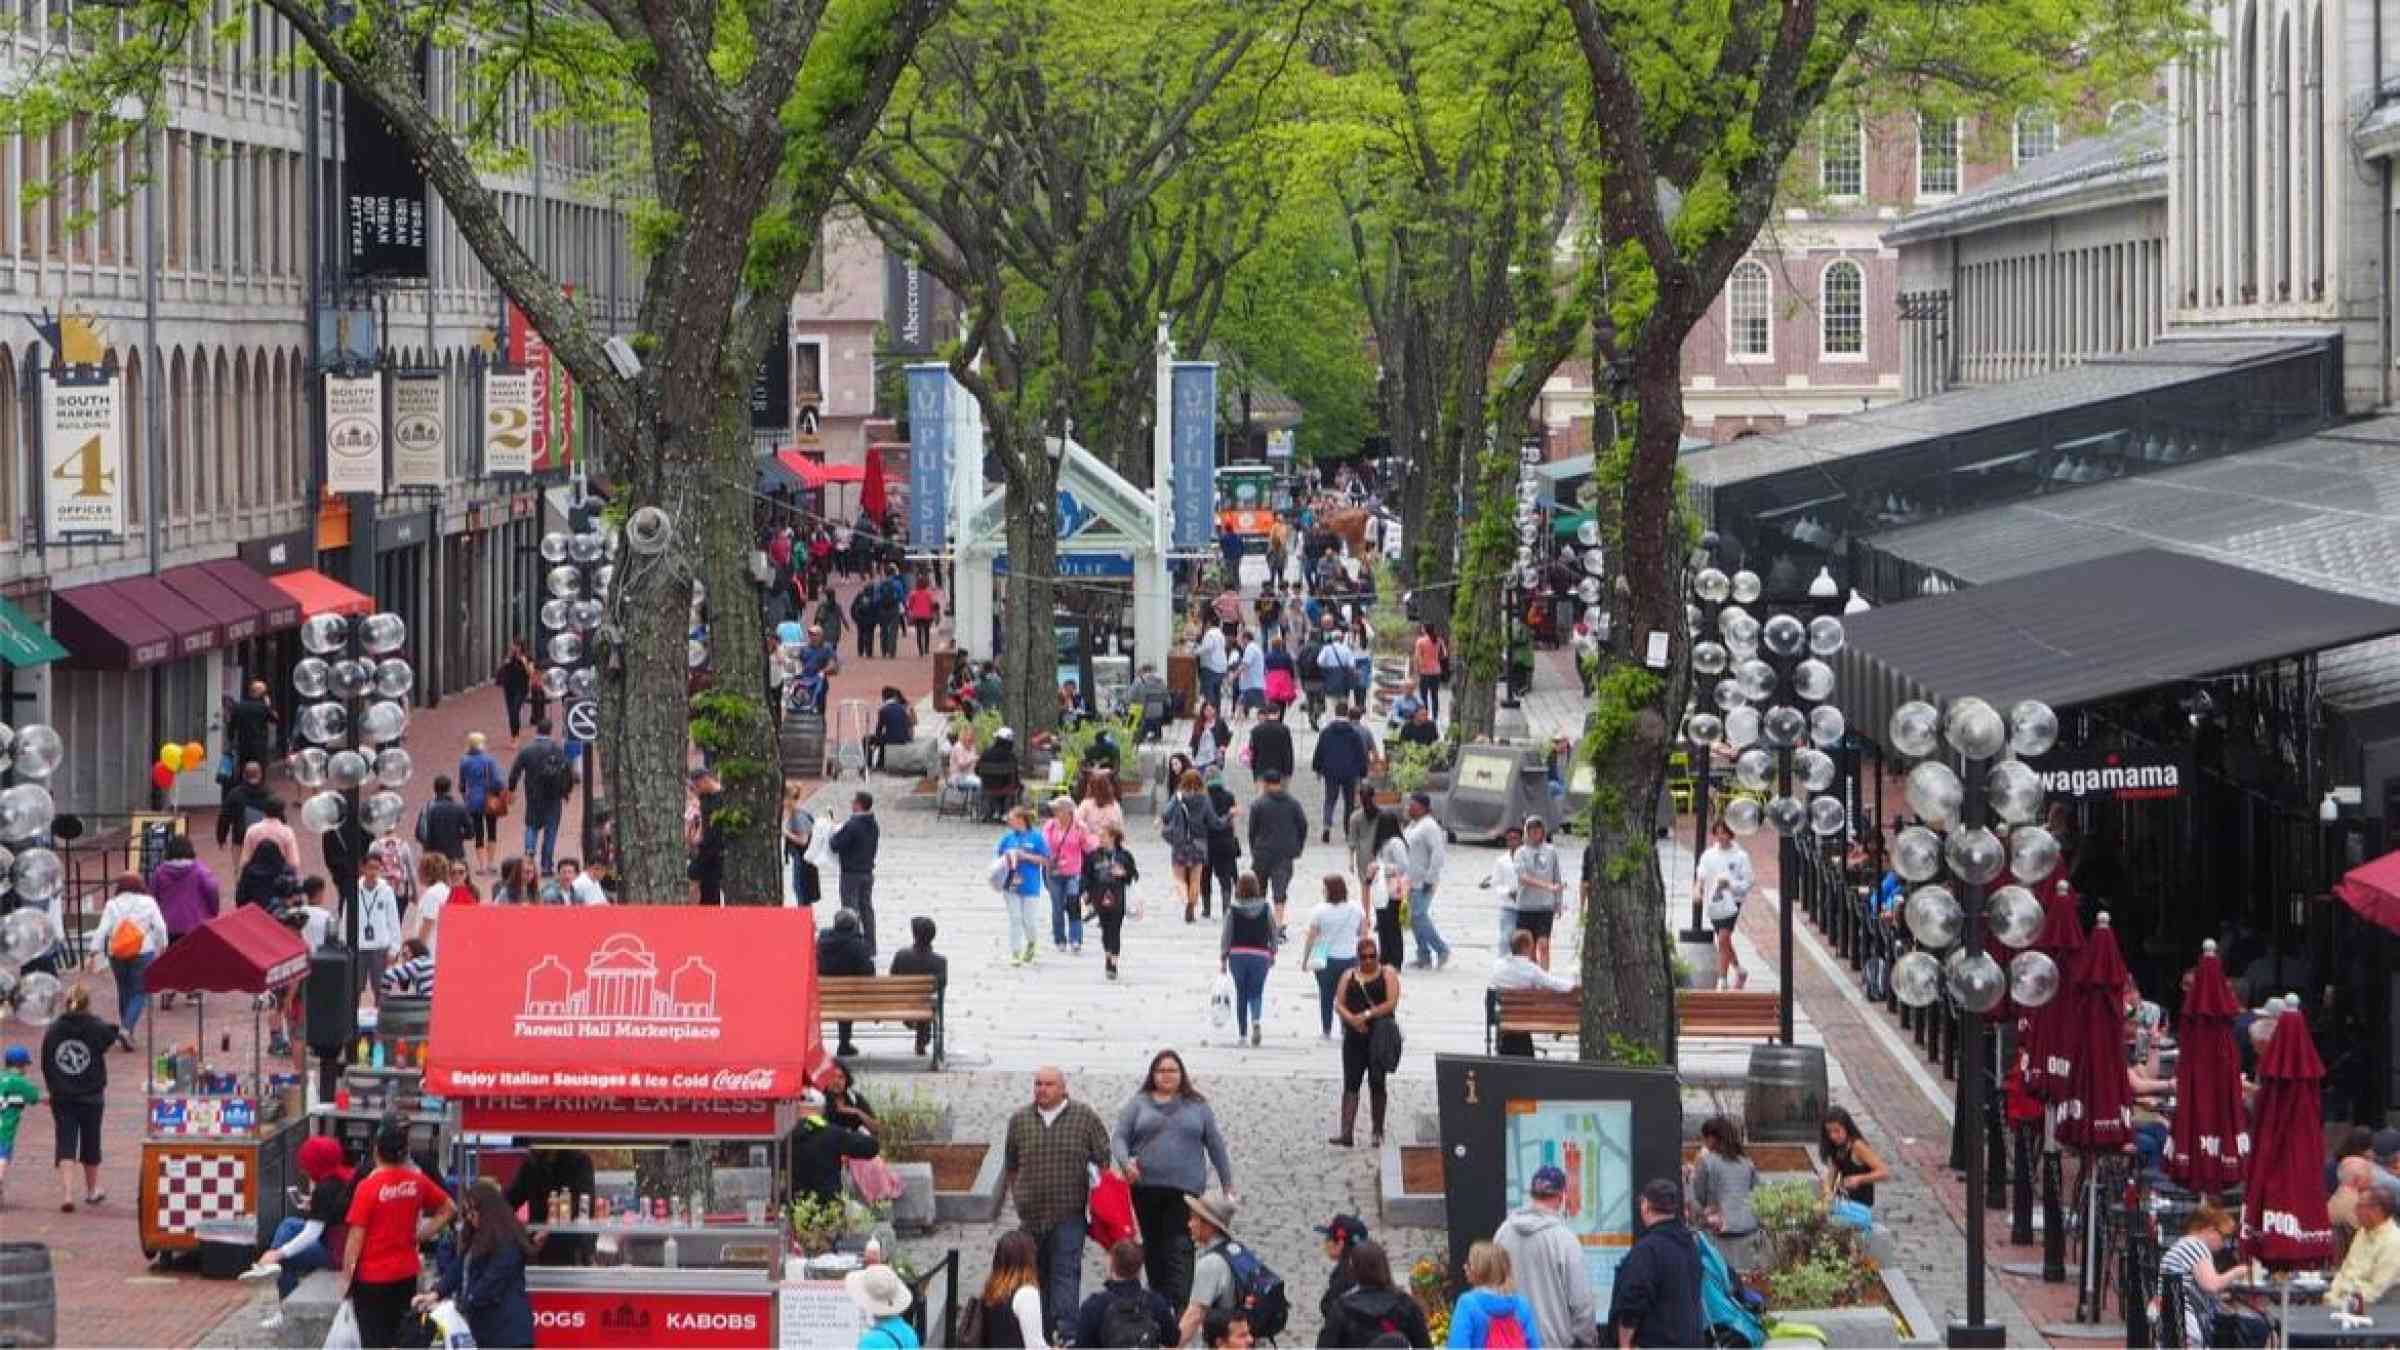  The area around Quincy Market, Shopping Center and Restaurants in Boston